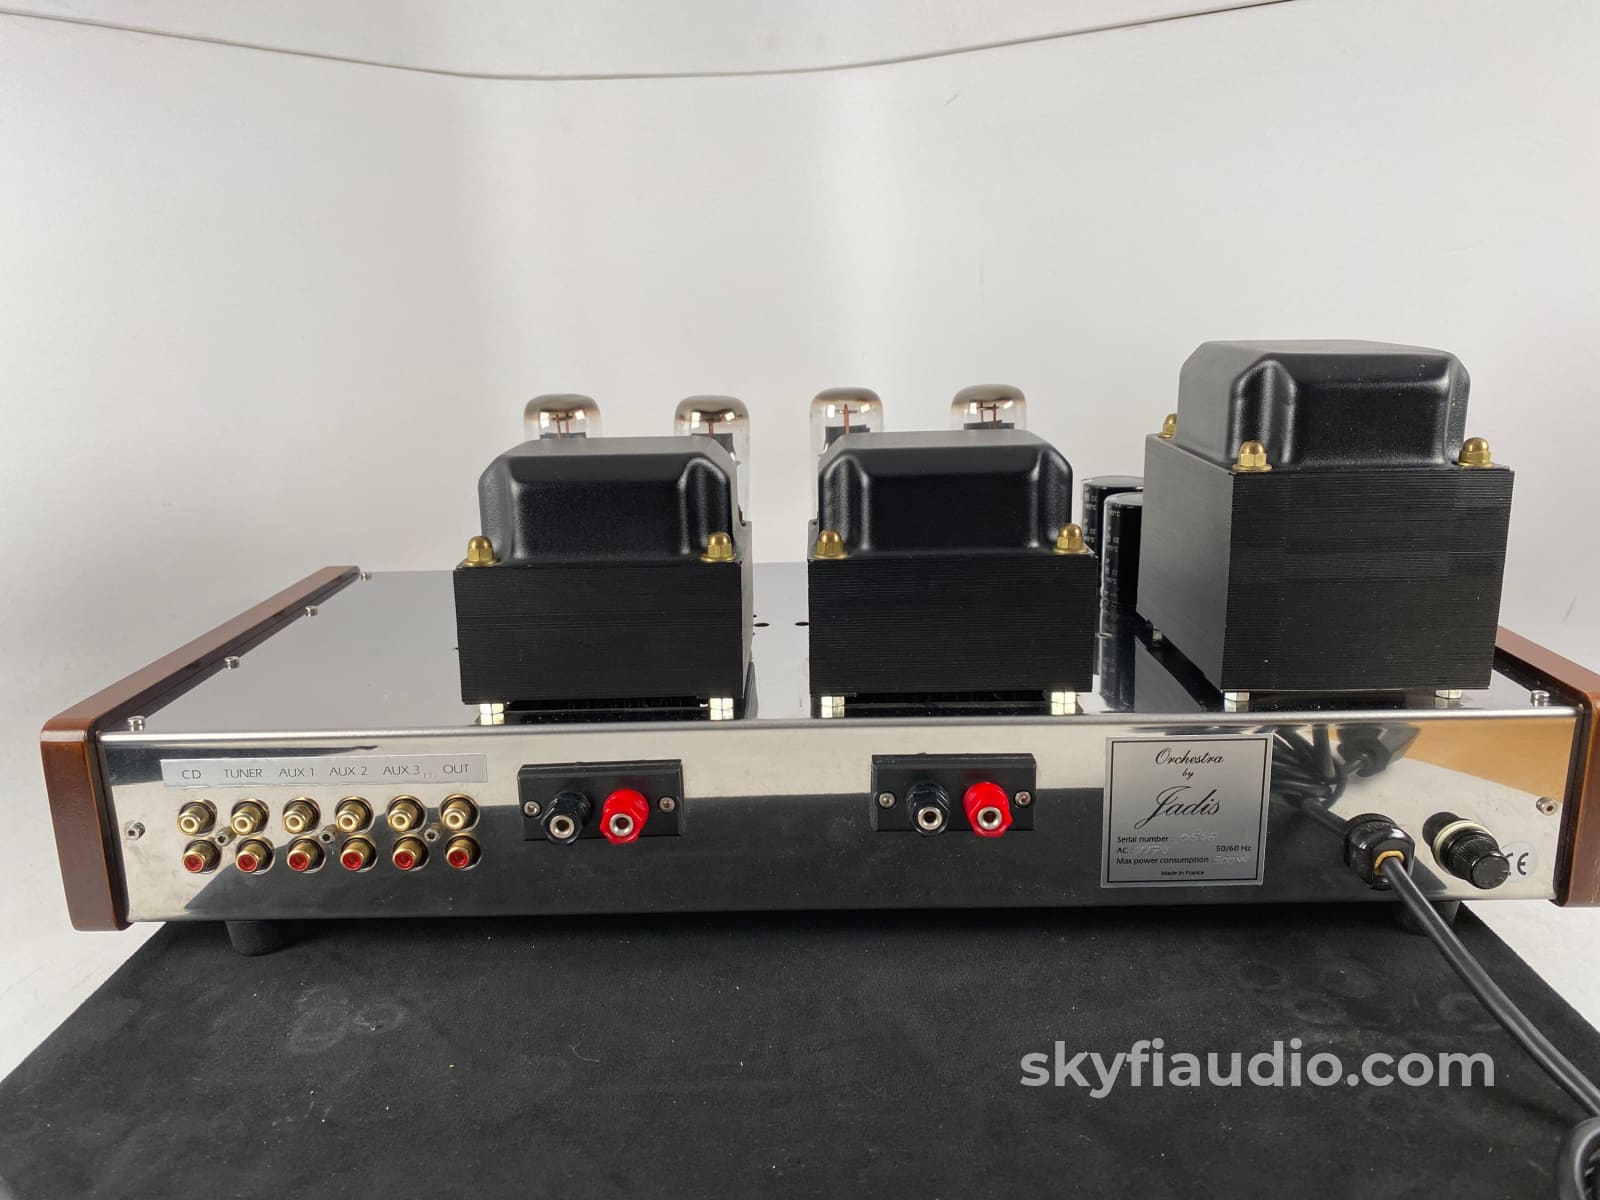 Jadis Orchestra Integrated Amplifier With El34S